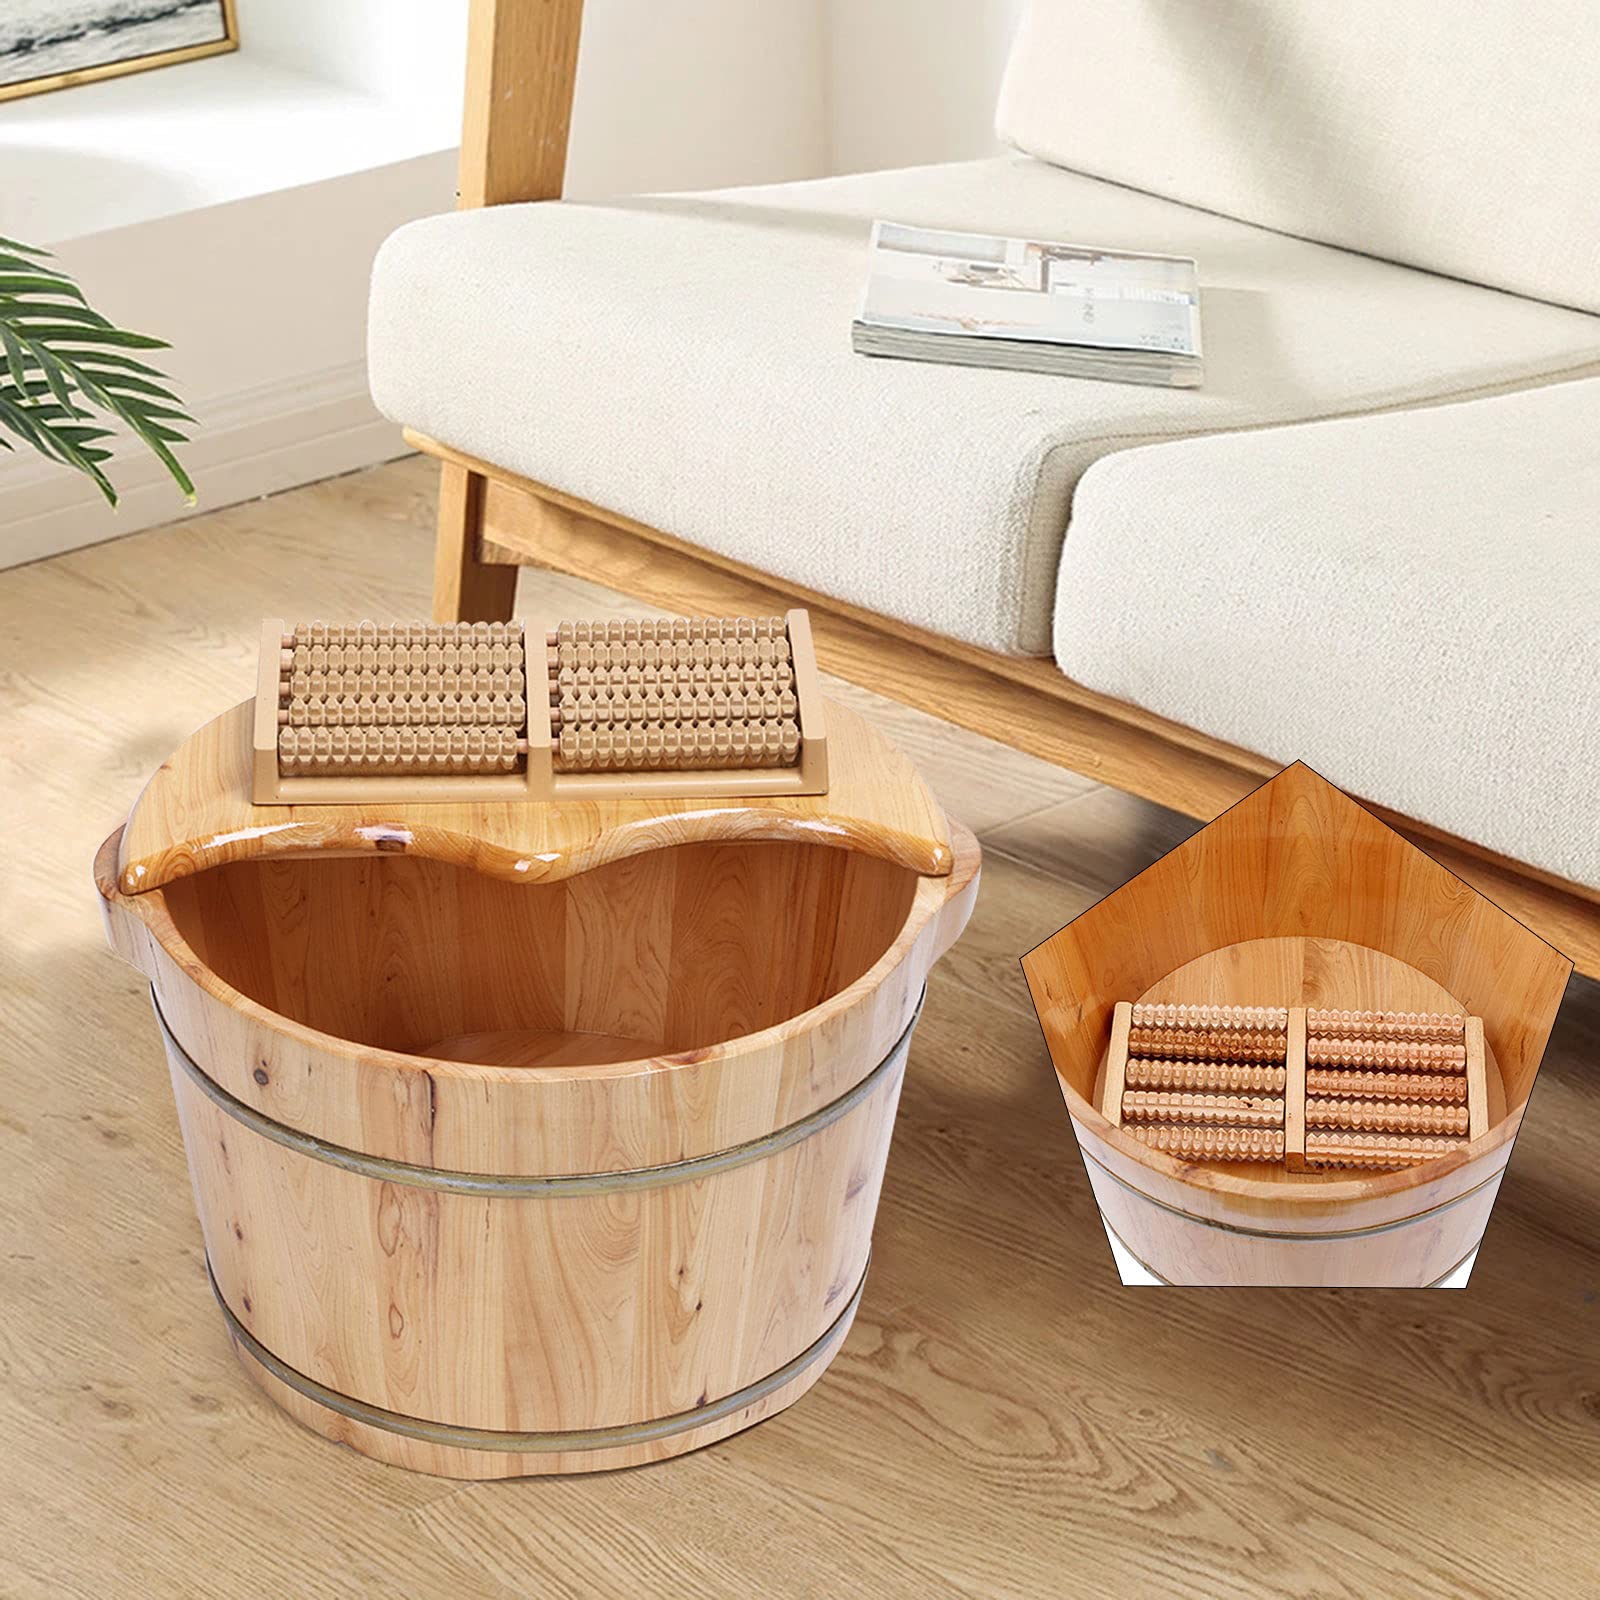 AngelcityCC Wood Foot Tub with Massager and lid, Solid Wood Handmade Wooden Foot Basin Set for Soaking Feet Spa Foot Care